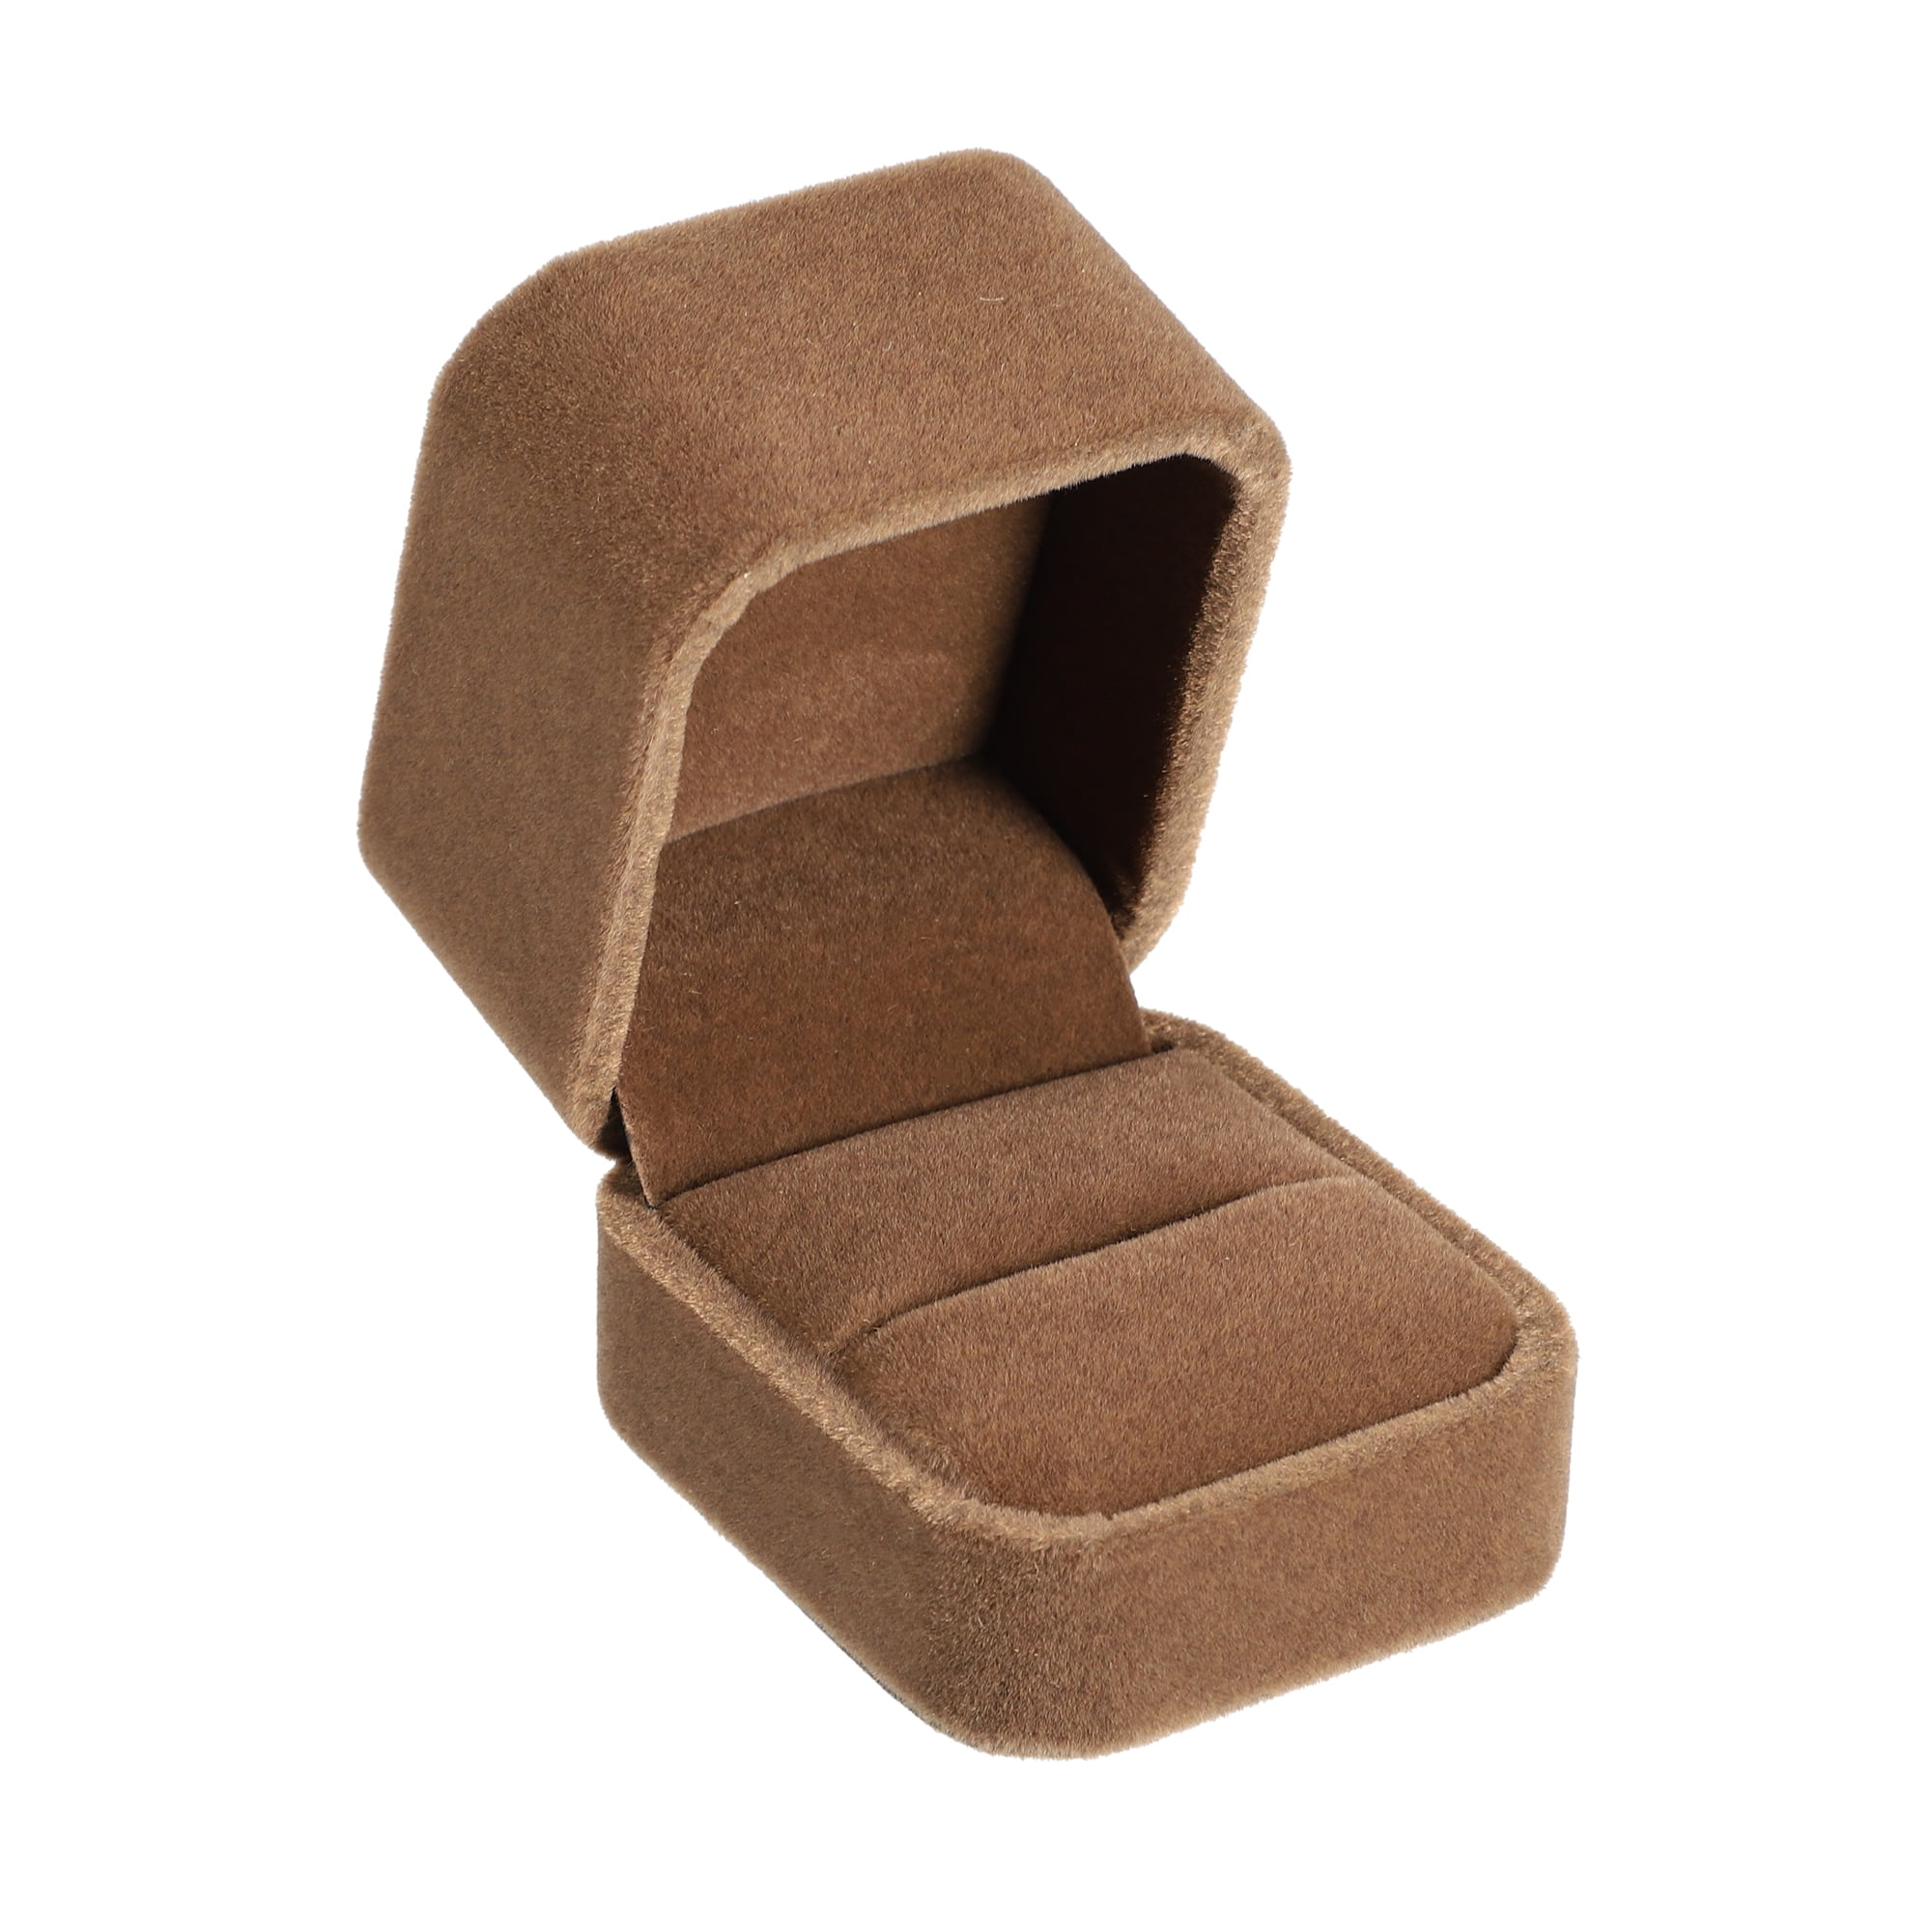 Coos Bay Suede Double Ring Box | Box Brokers Group